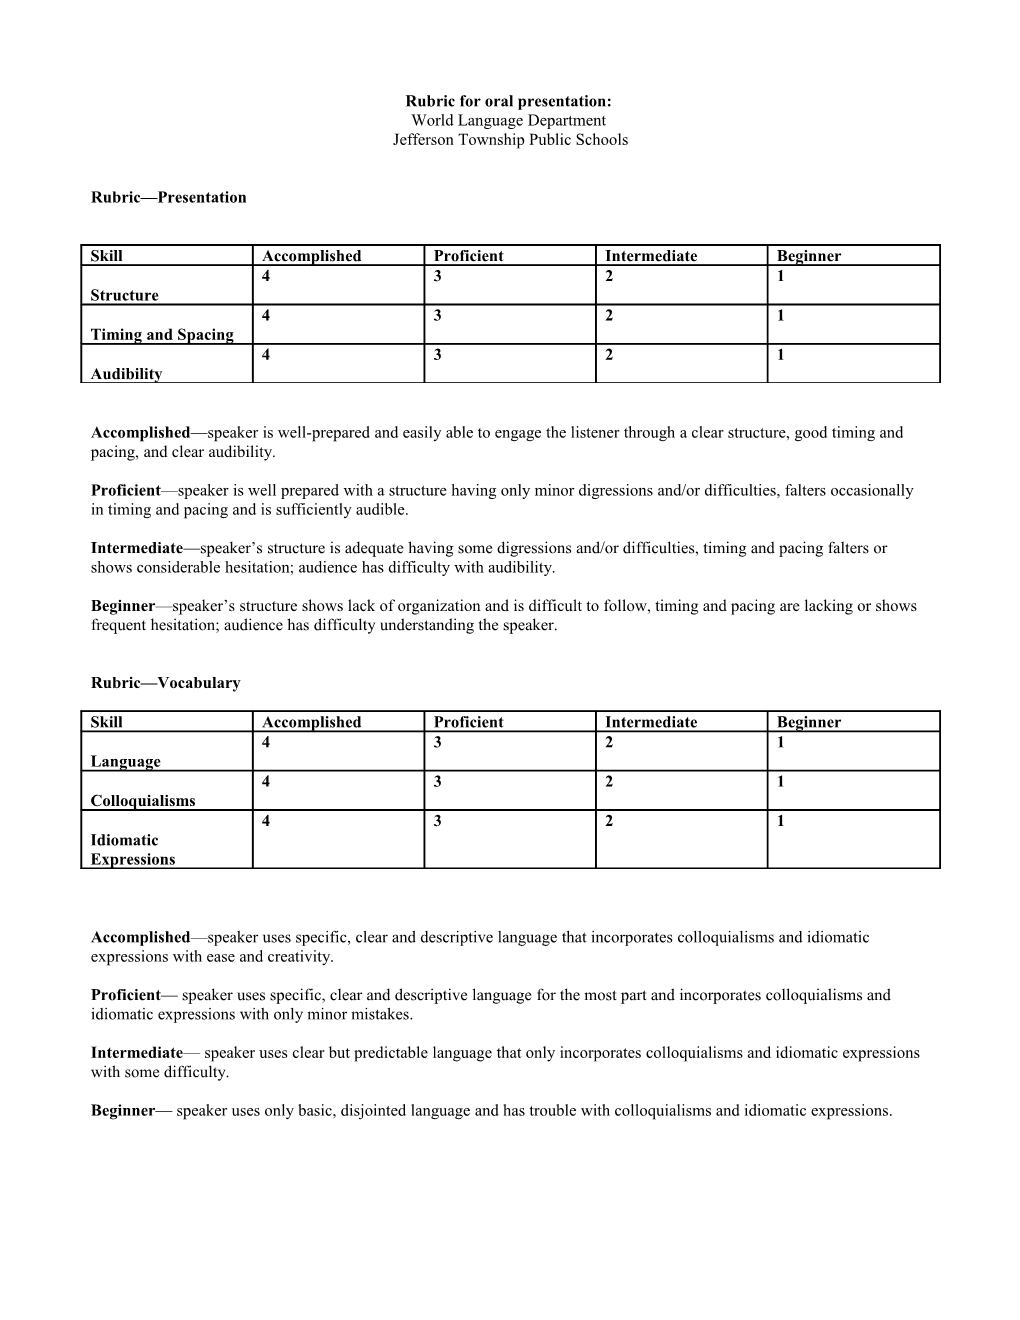 Rubric for Oral Presentation: Foreign Language Department